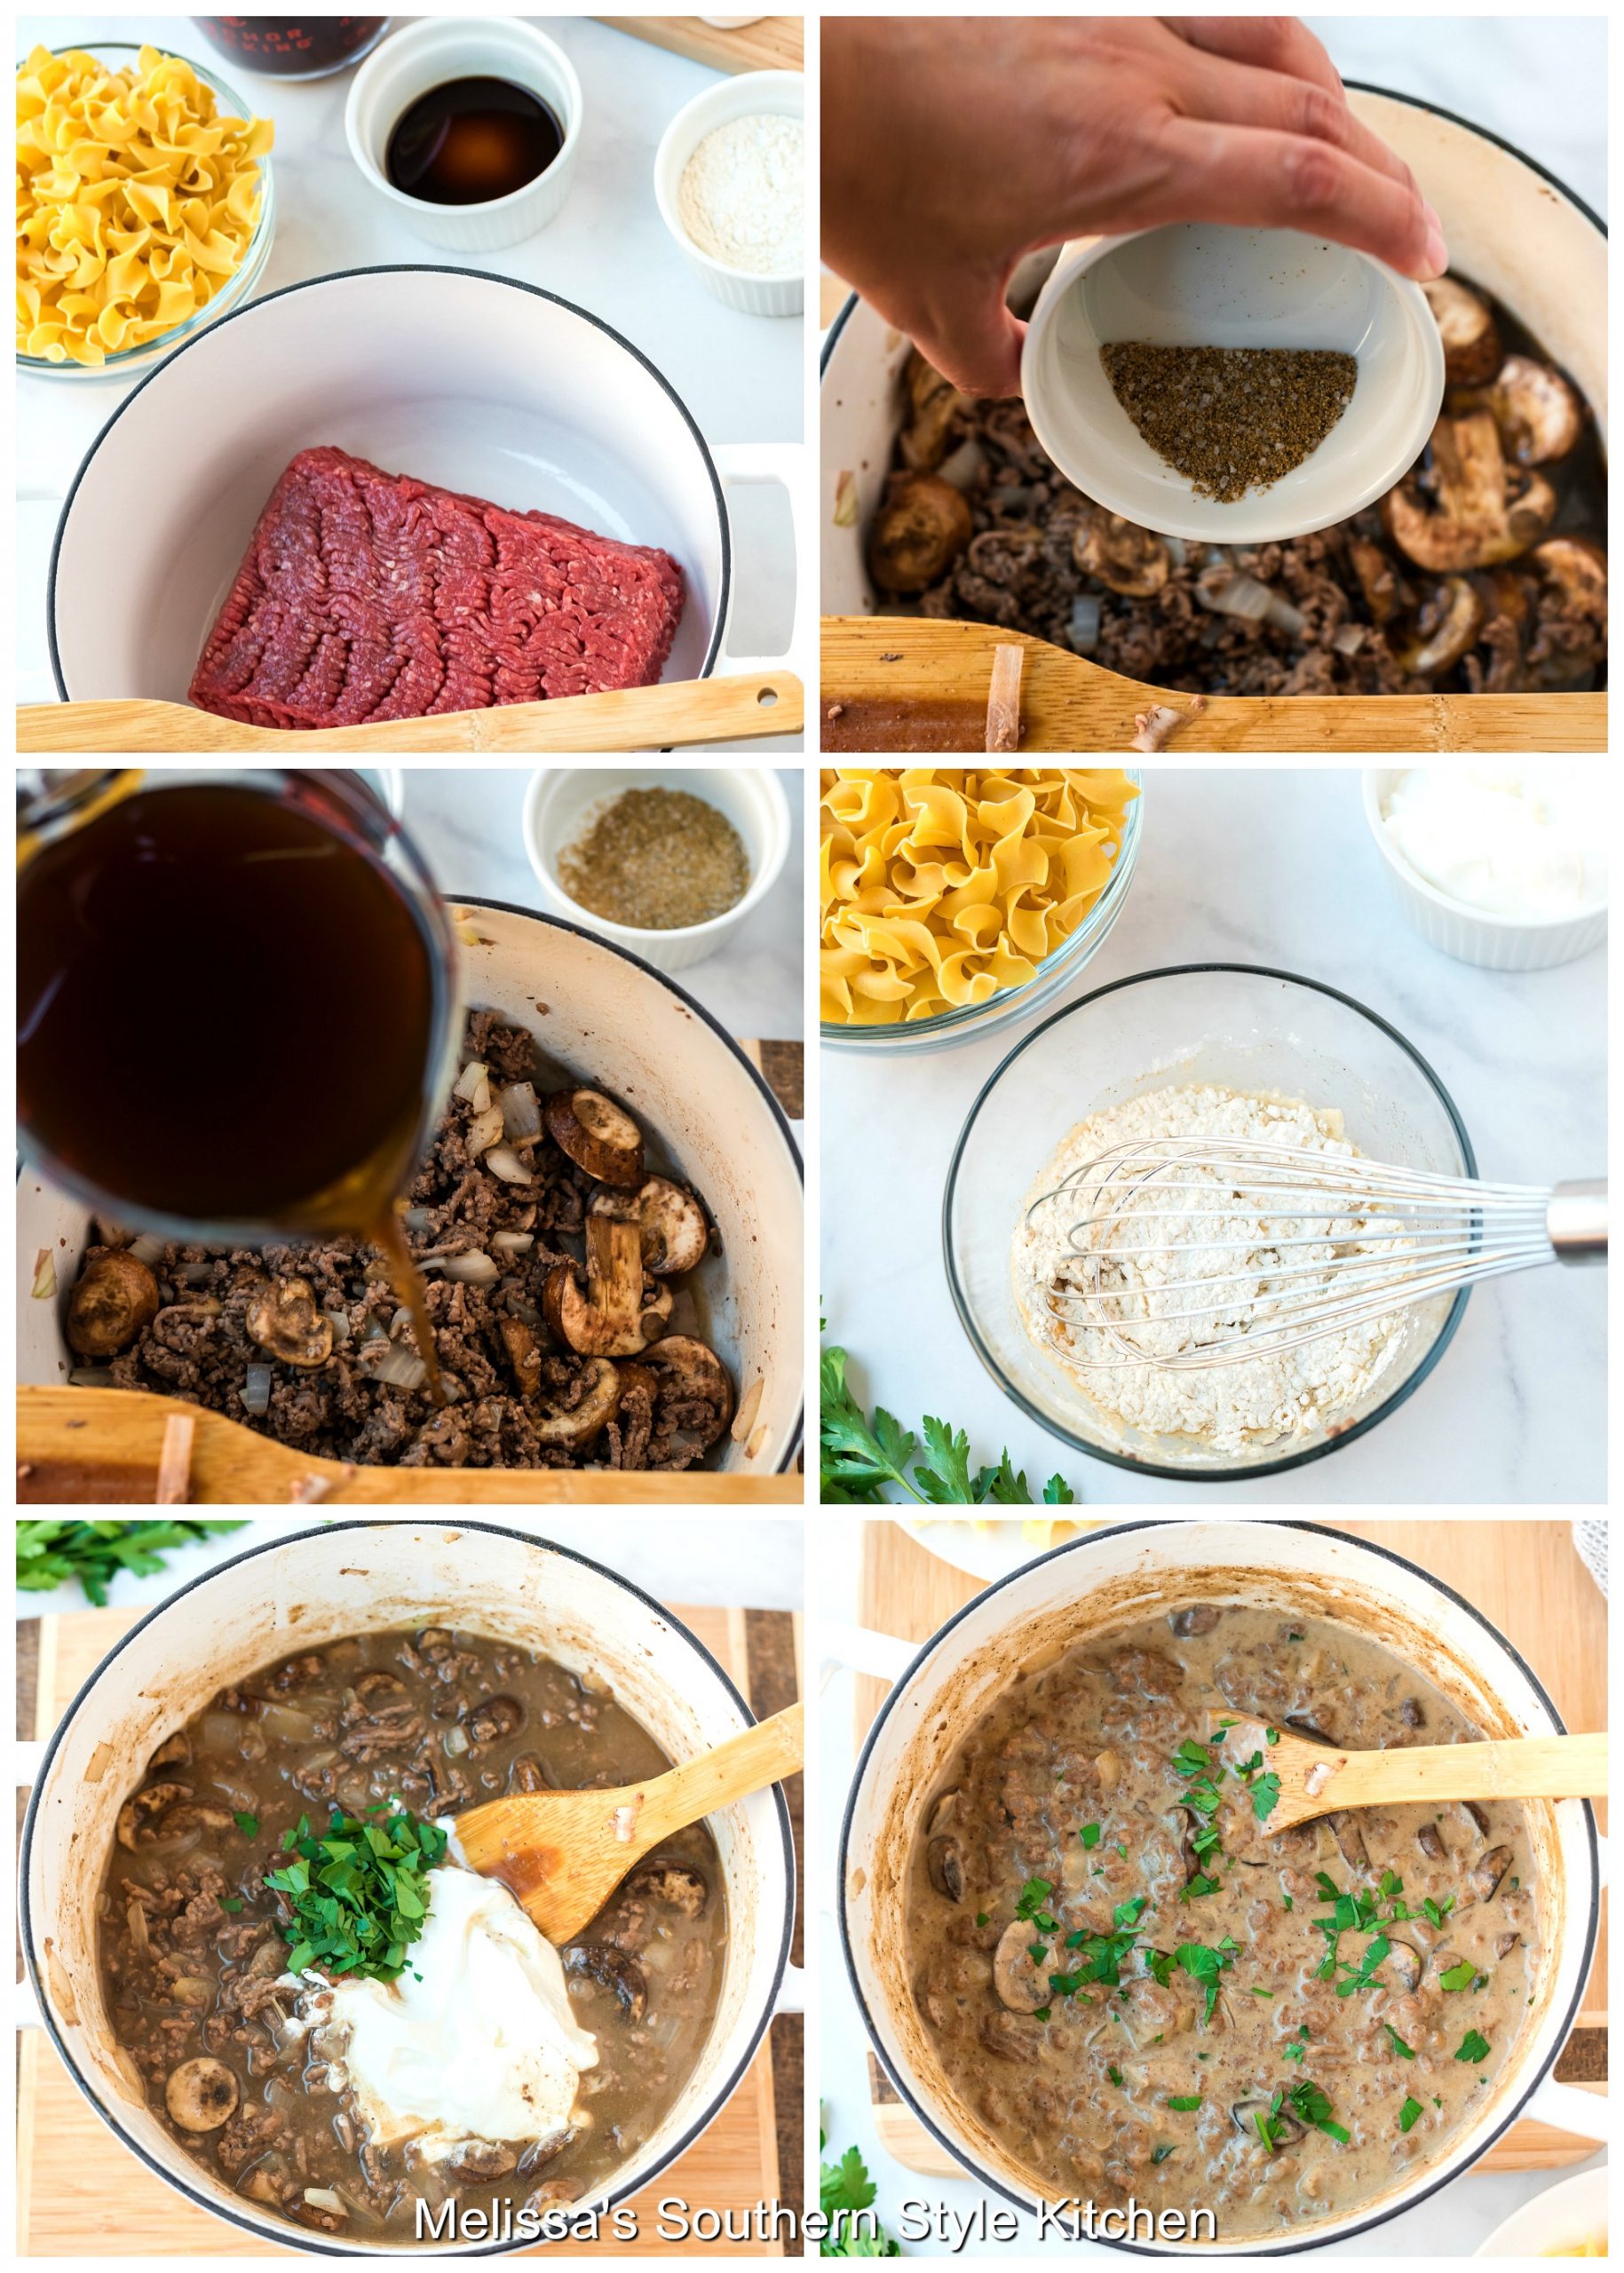 Step-by-step preparation images and ingredients for Ground Beef Stroganoff